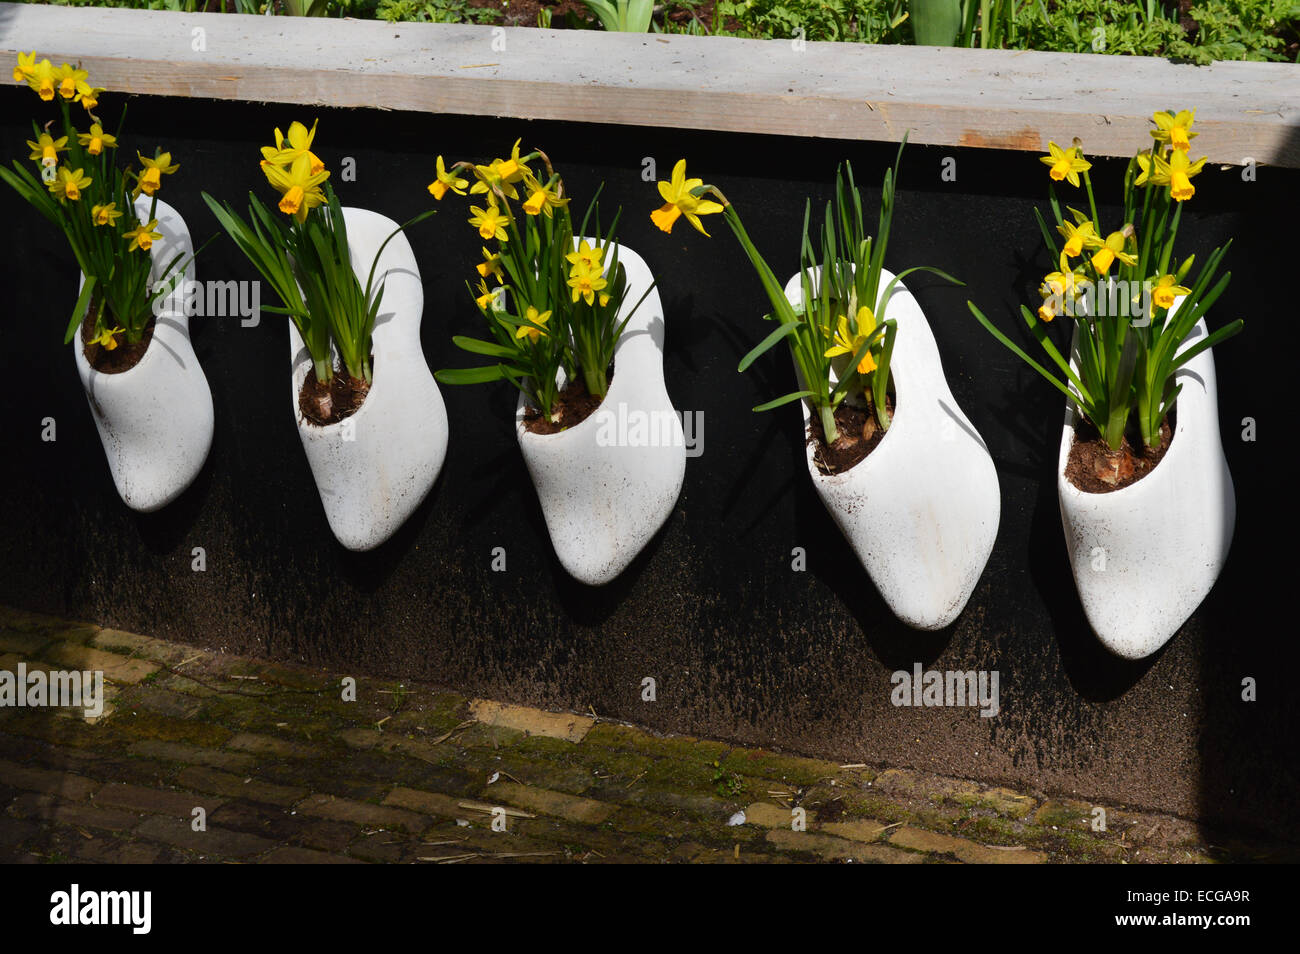 Five White Clogs planted with Miniature Daffodils on display at Keukenhof Garden, Holland Stock Photo